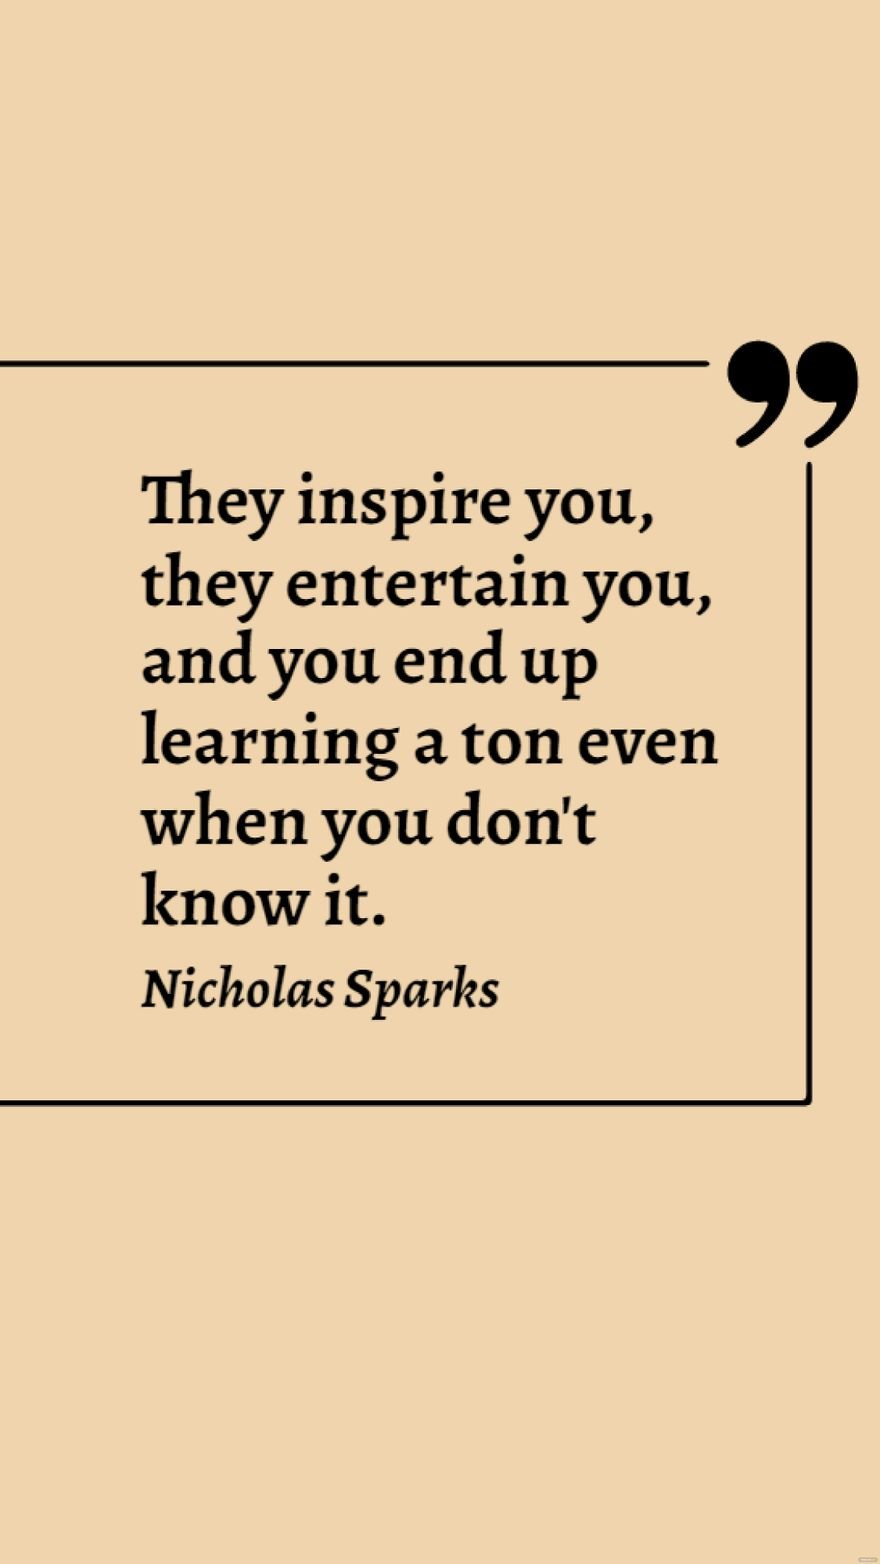 Nicholas Sparks - They inspire you, they entertain you, and you end up learning a ton even when you don't know it.